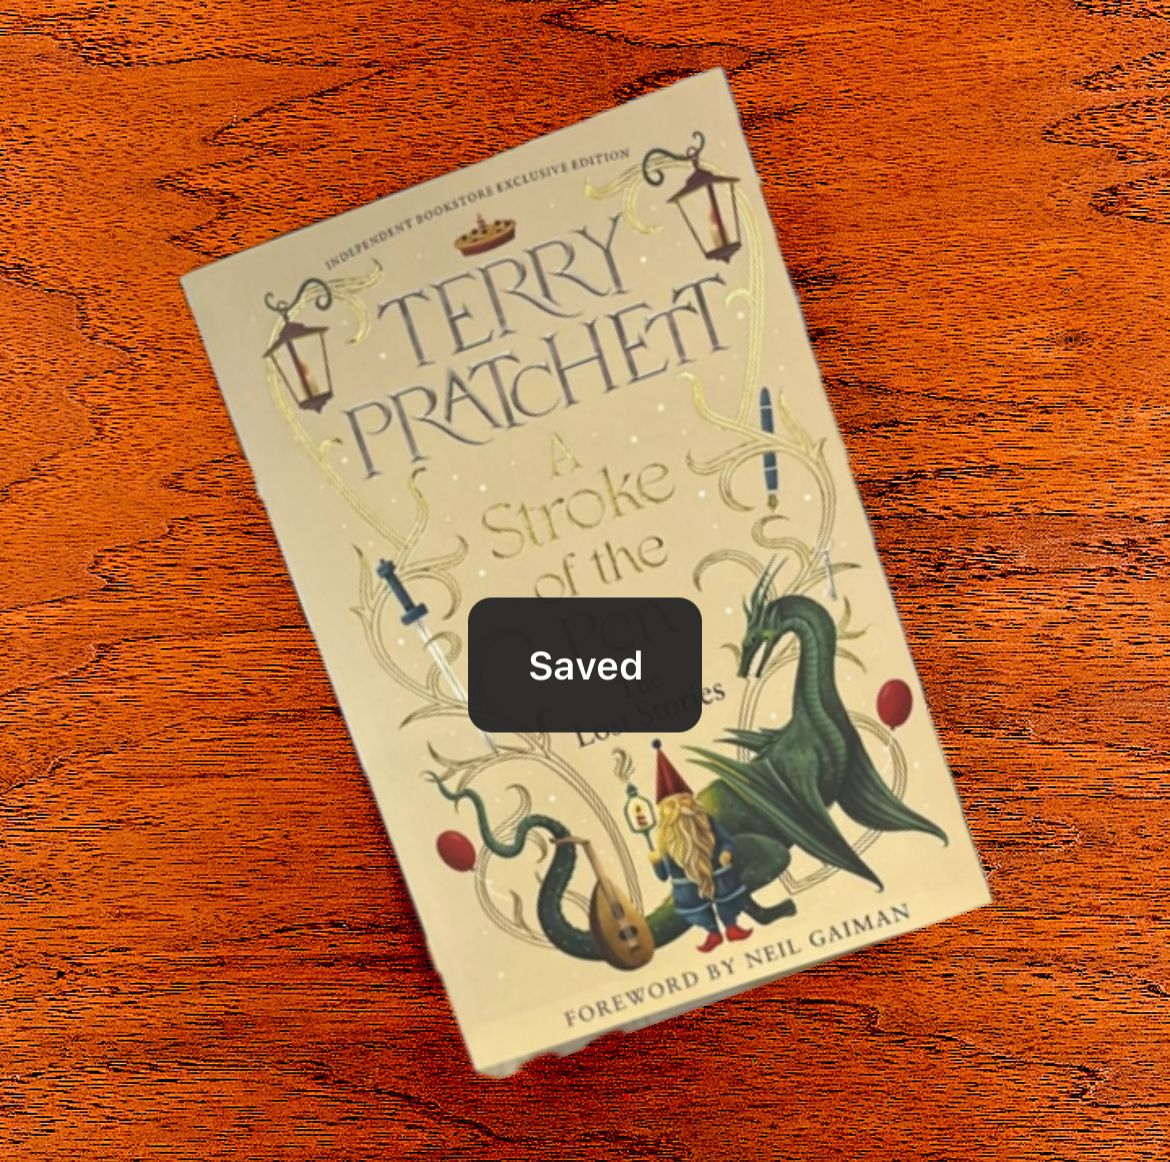 Stop by your favorite indie to pick up this #IndieBookstoreDay Exclusive: a special birthday edition of Terry Pratchett's A STROKE OF THE PEN—available today, only at indie bookstores!